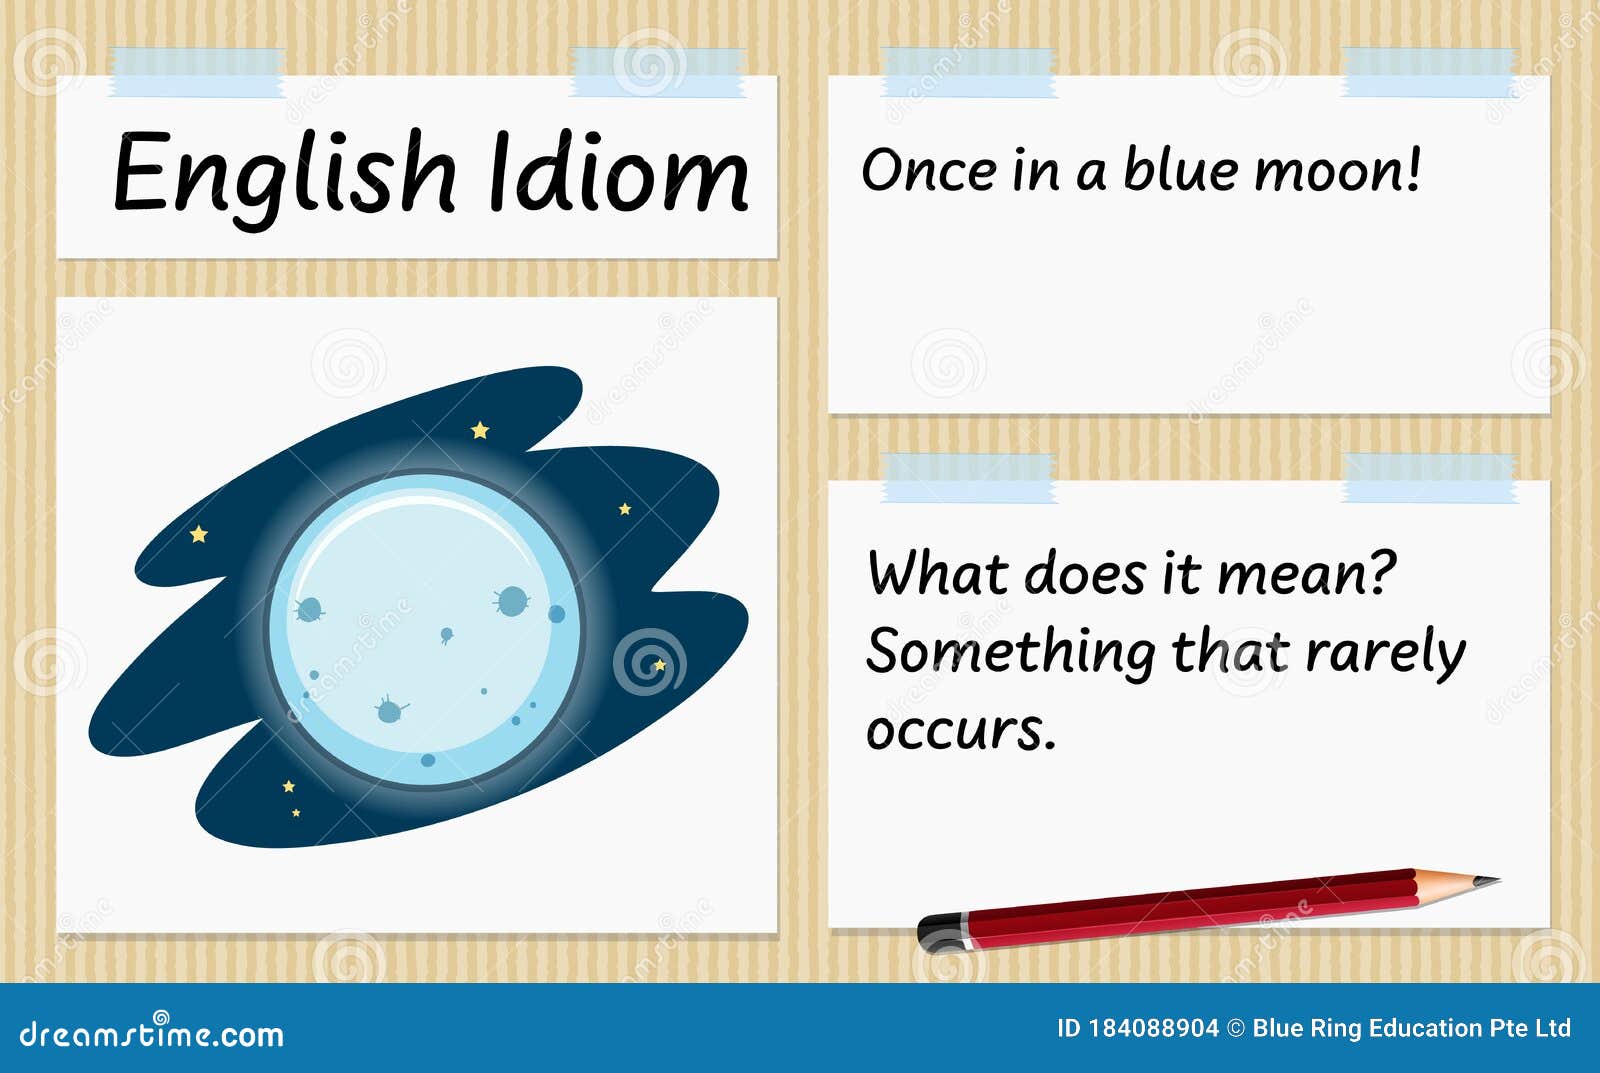 Moon idioms. Blue Moon идиома. Once in a Blue Moon. Once in a Blue Moon idiom. Once in a Blue Moon meaning.